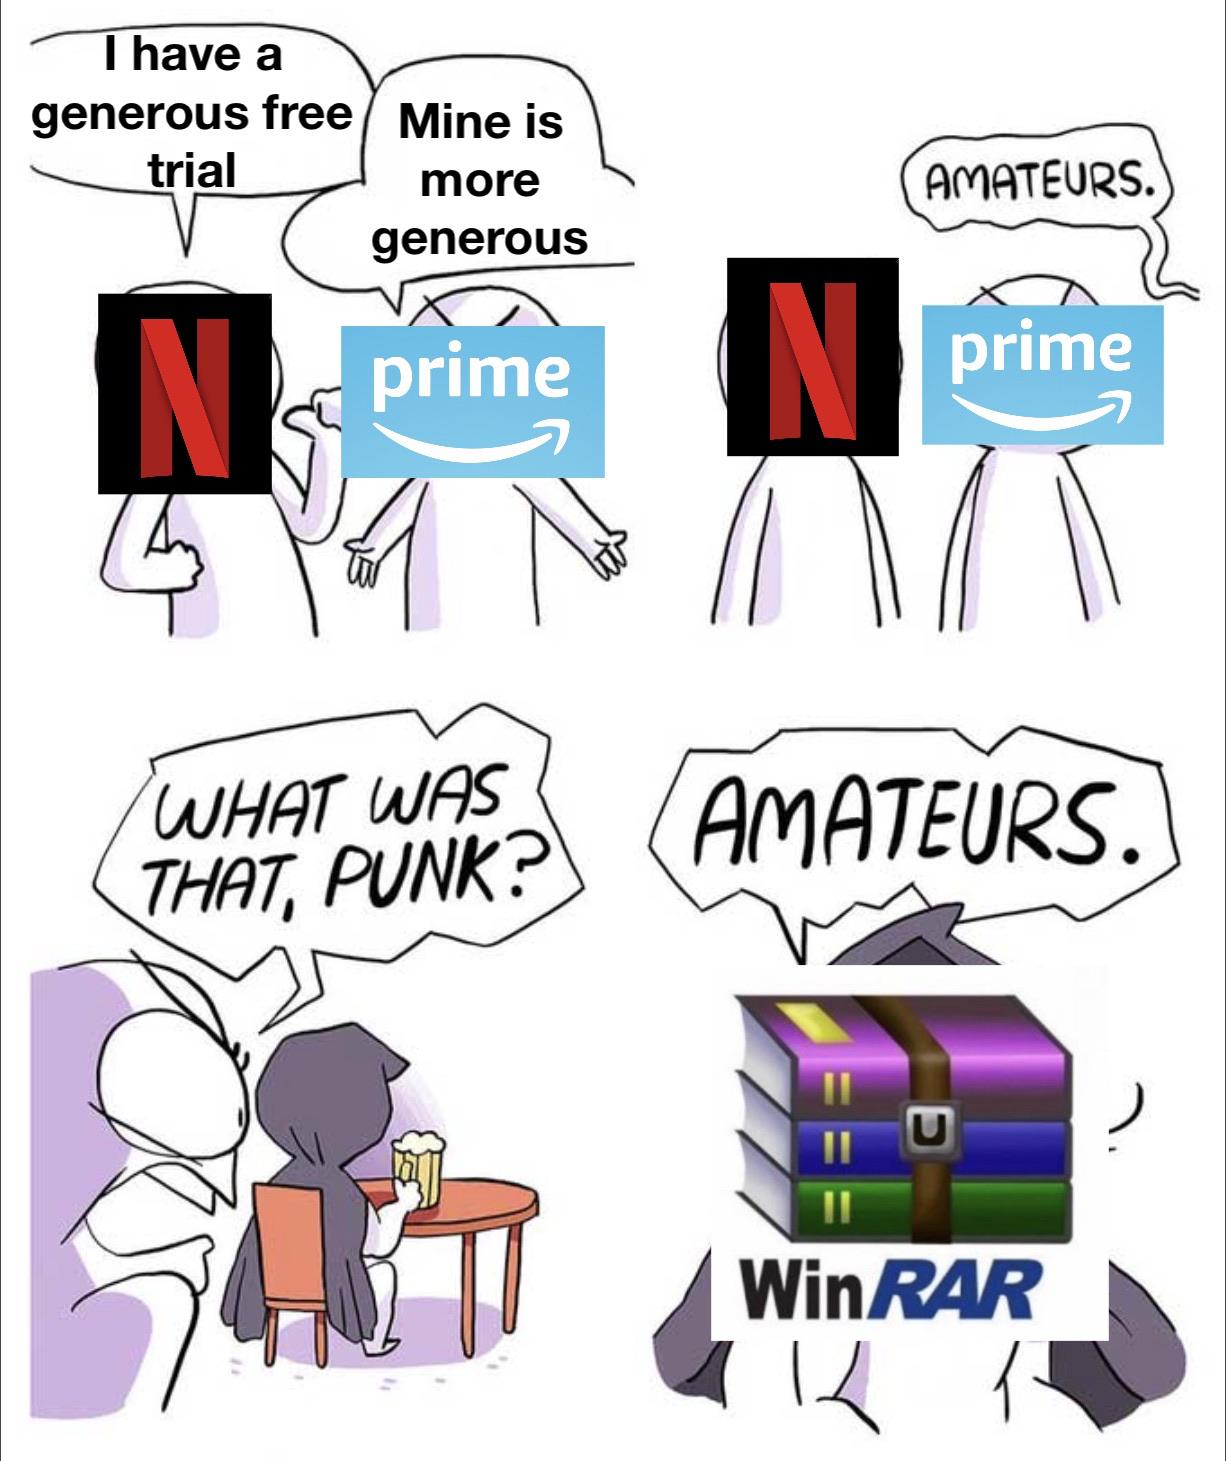 Funny, WinRAR, RAR, Prime, Netflix, TgZRVVr3 other memes Funny, WinRAR, RAR, Prime, Netflix, TgZRVVr3 text: I have a generous free Mine is trial more generous WHAT was THAT, PUNK? ACOATEURS. prime Am9TEURS. u WinR4R 